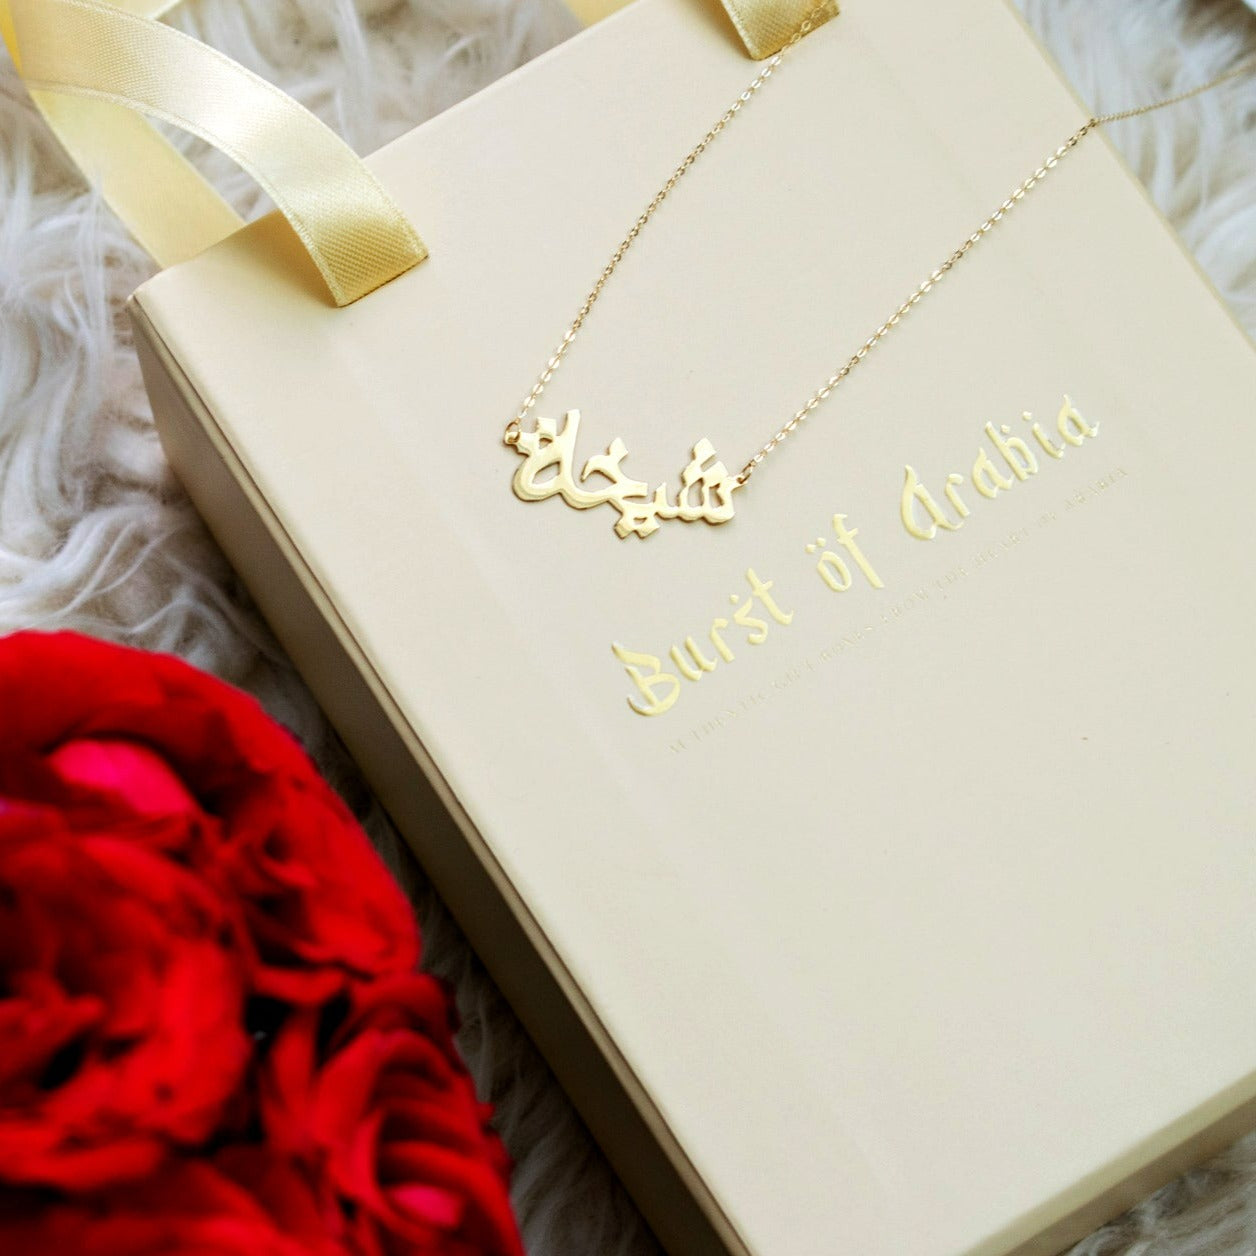 Gold Heart-shaped Birthstone Necklace Designed and handcrafted in the UAE.